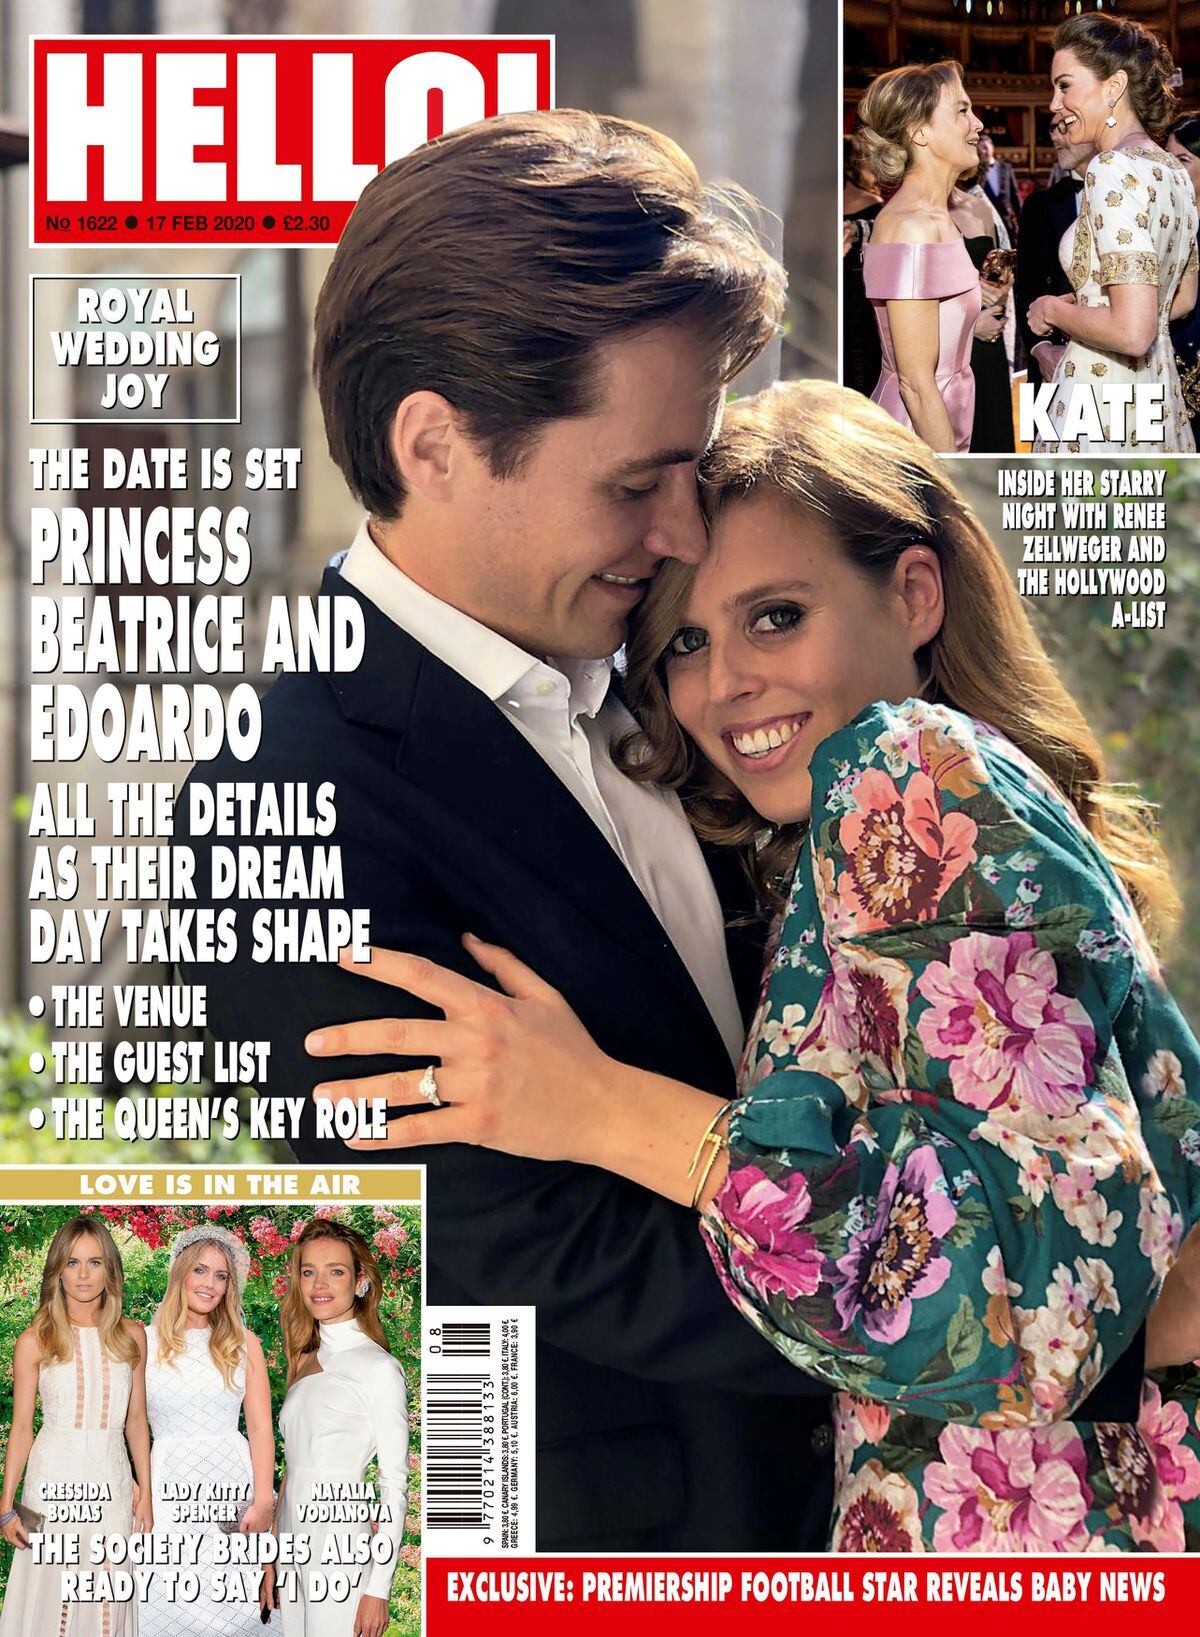 The couple feature in the latest edition of Hello! Image: Hello!/PA Wire